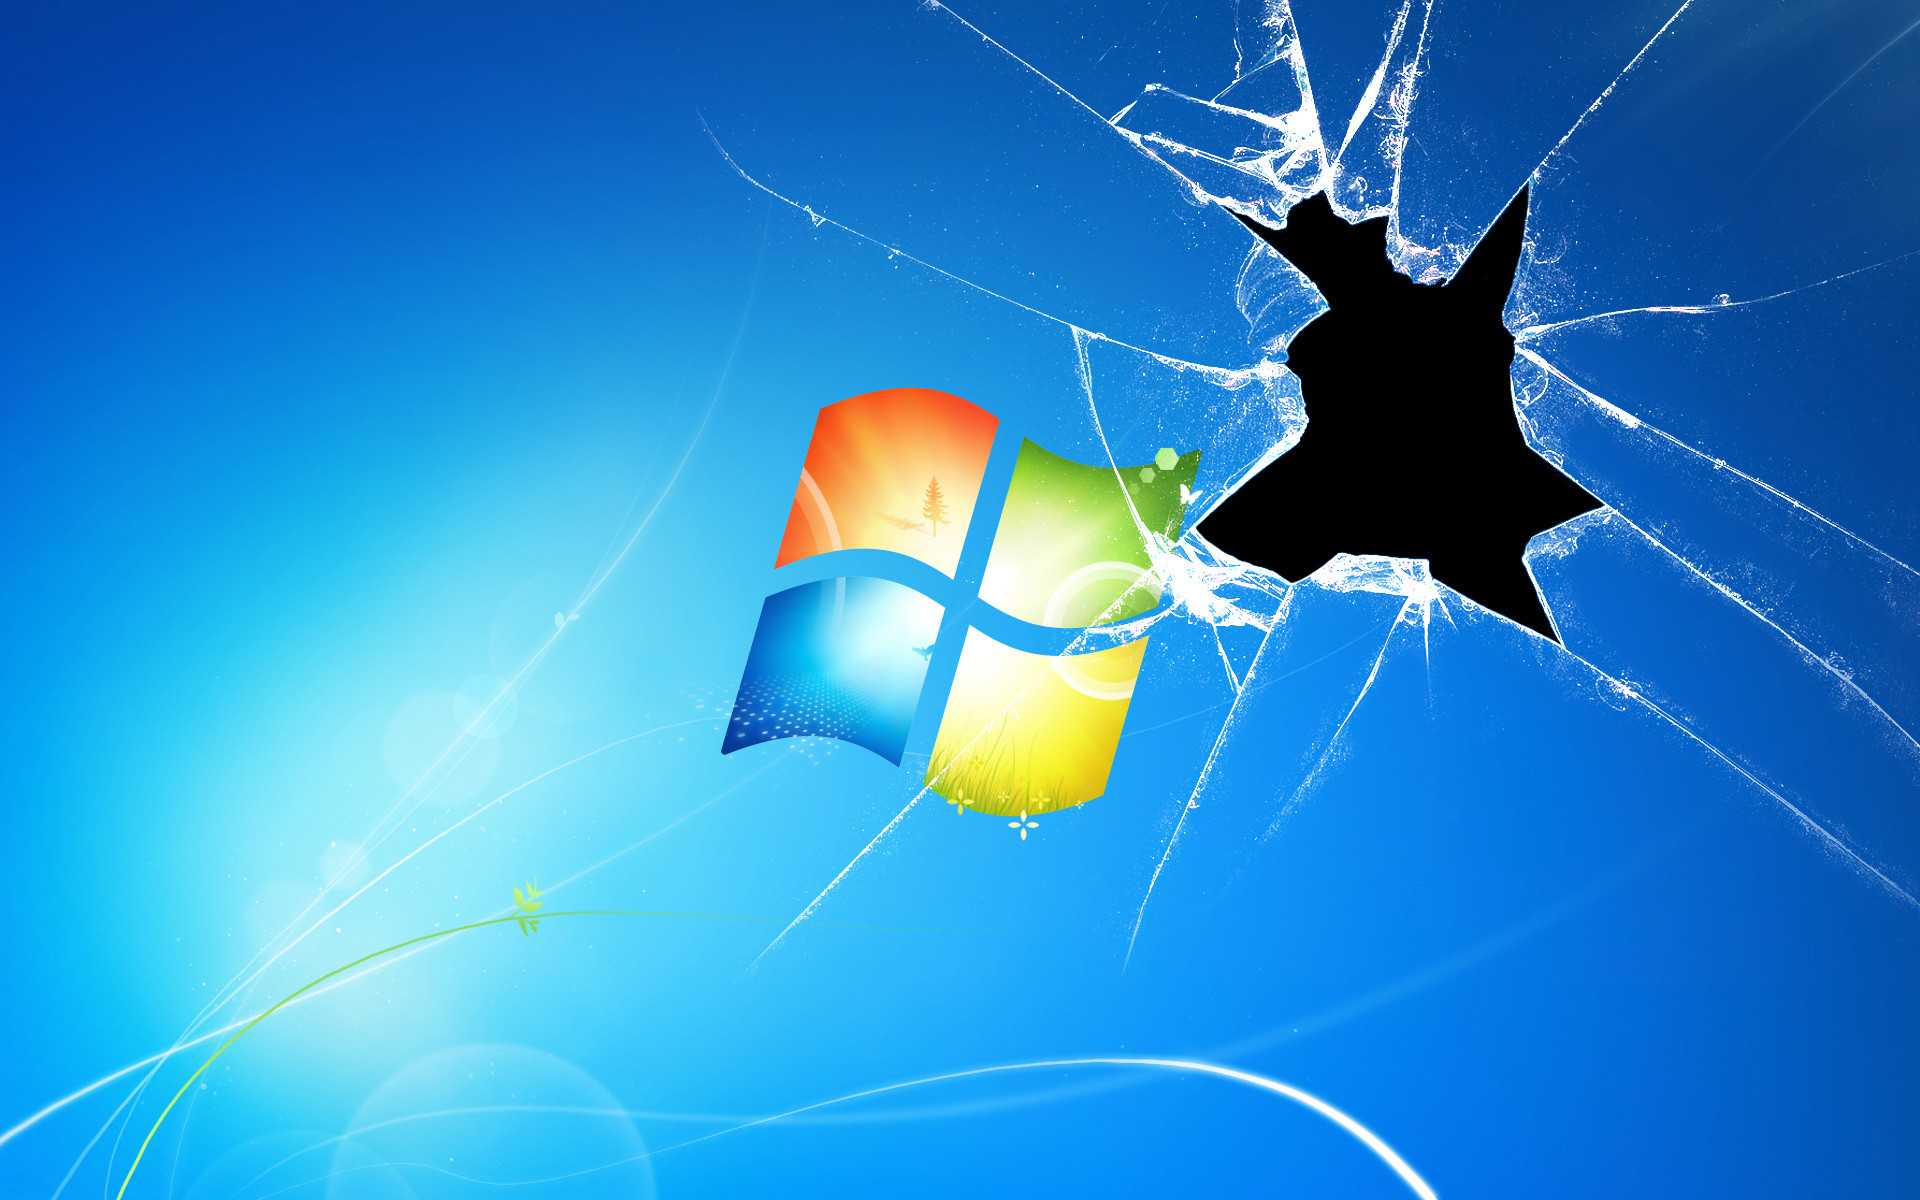 Technology Cracked Screen HD Wallpaper | Background Image